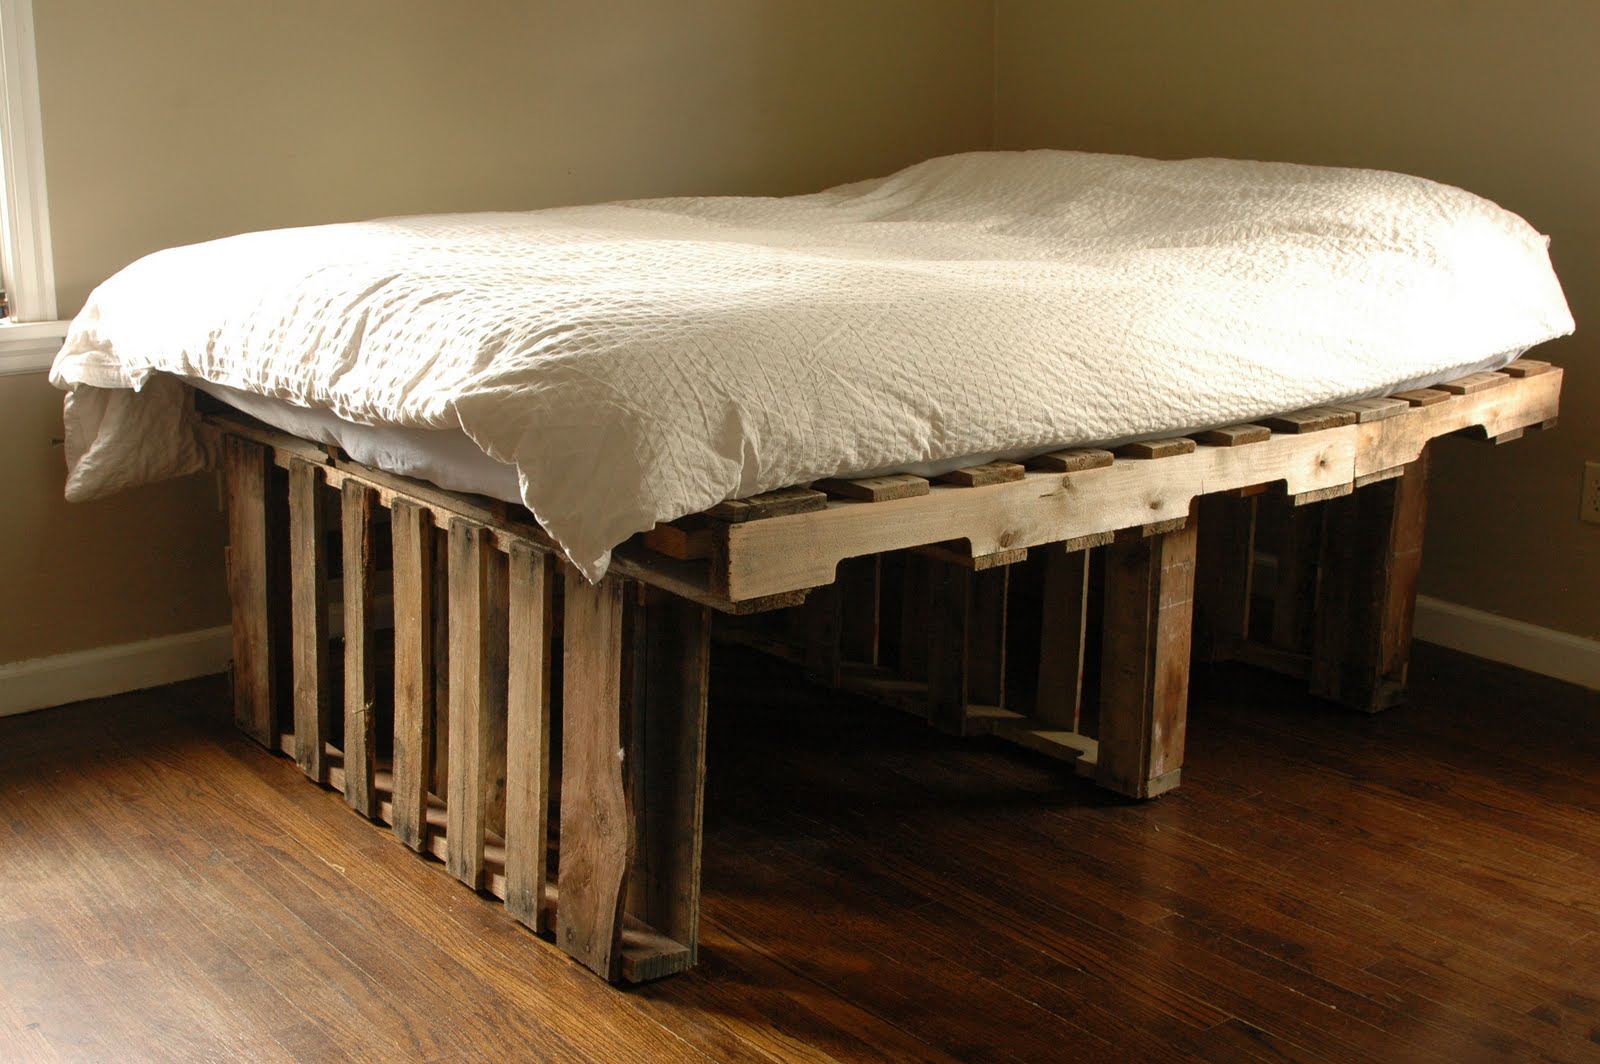  Platform Bed With Pallets | Search Results | DIY Woodworking Projects